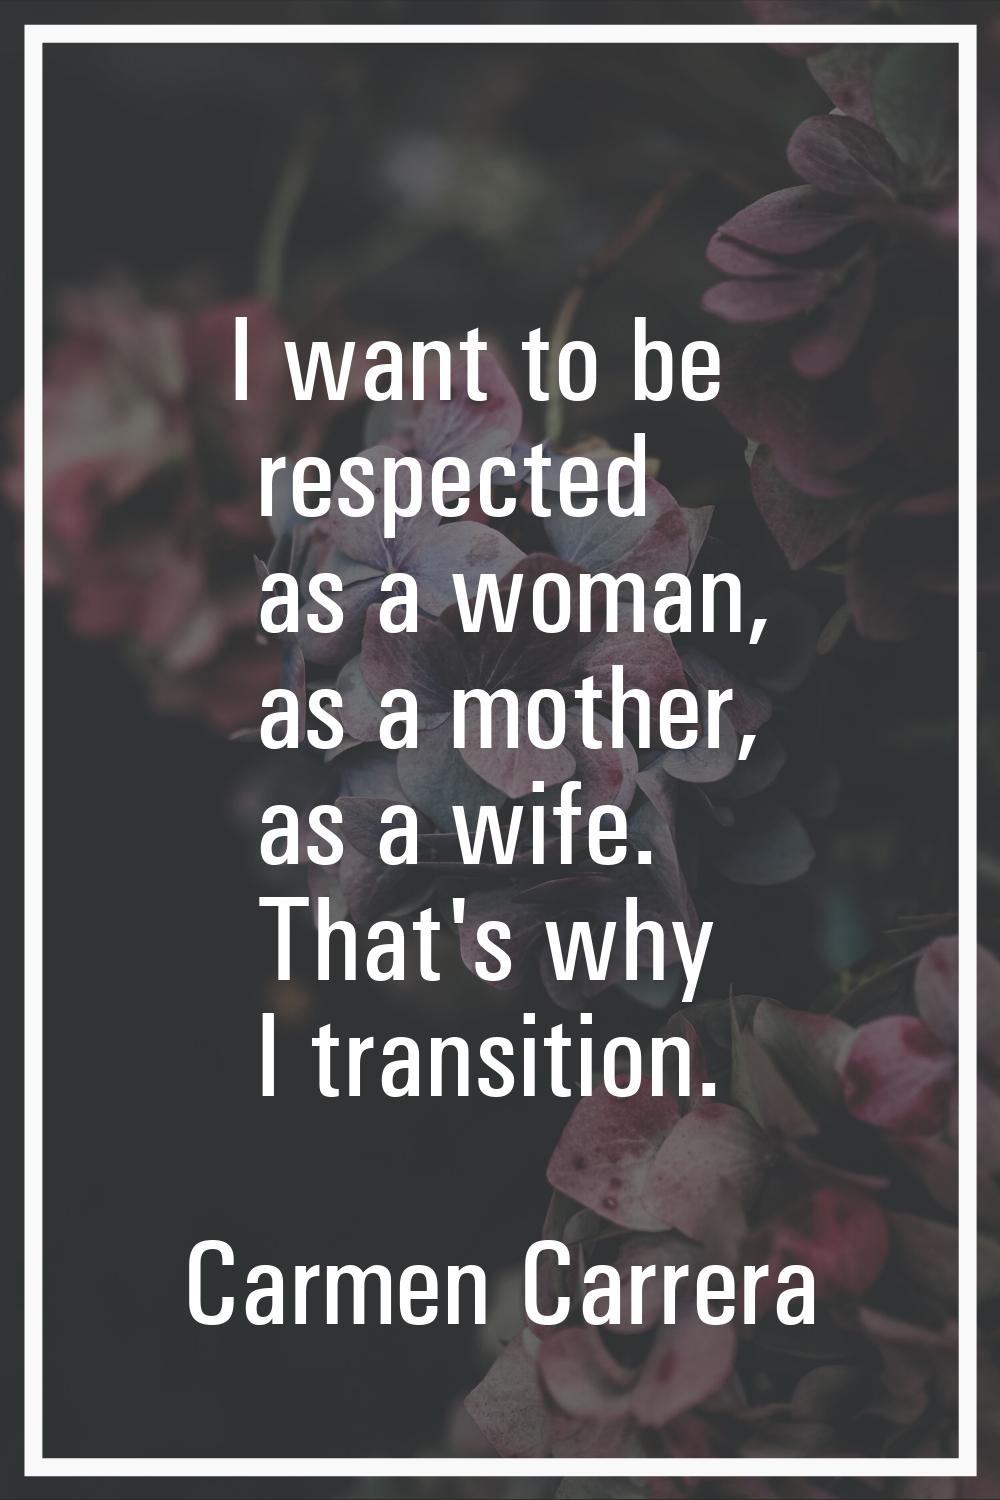 I want to be respected as a woman, as a mother, as a wife. That's why I transition.